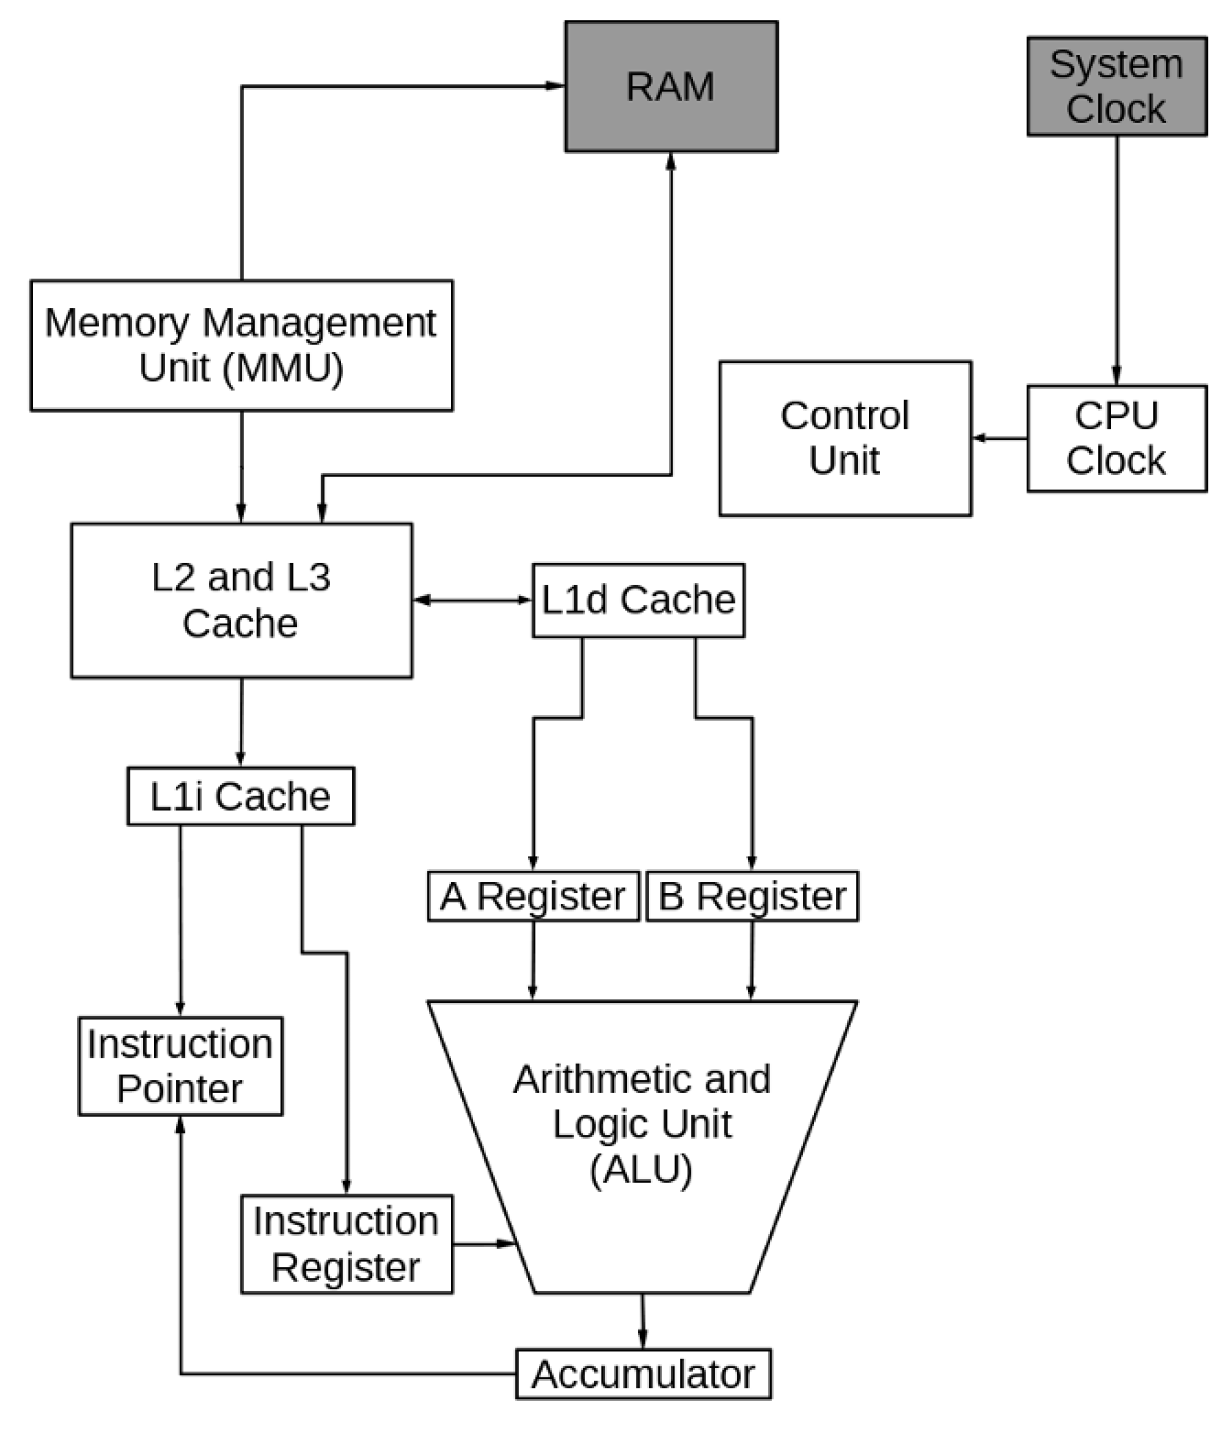 The central processing unit (CPU): Its components and functionality